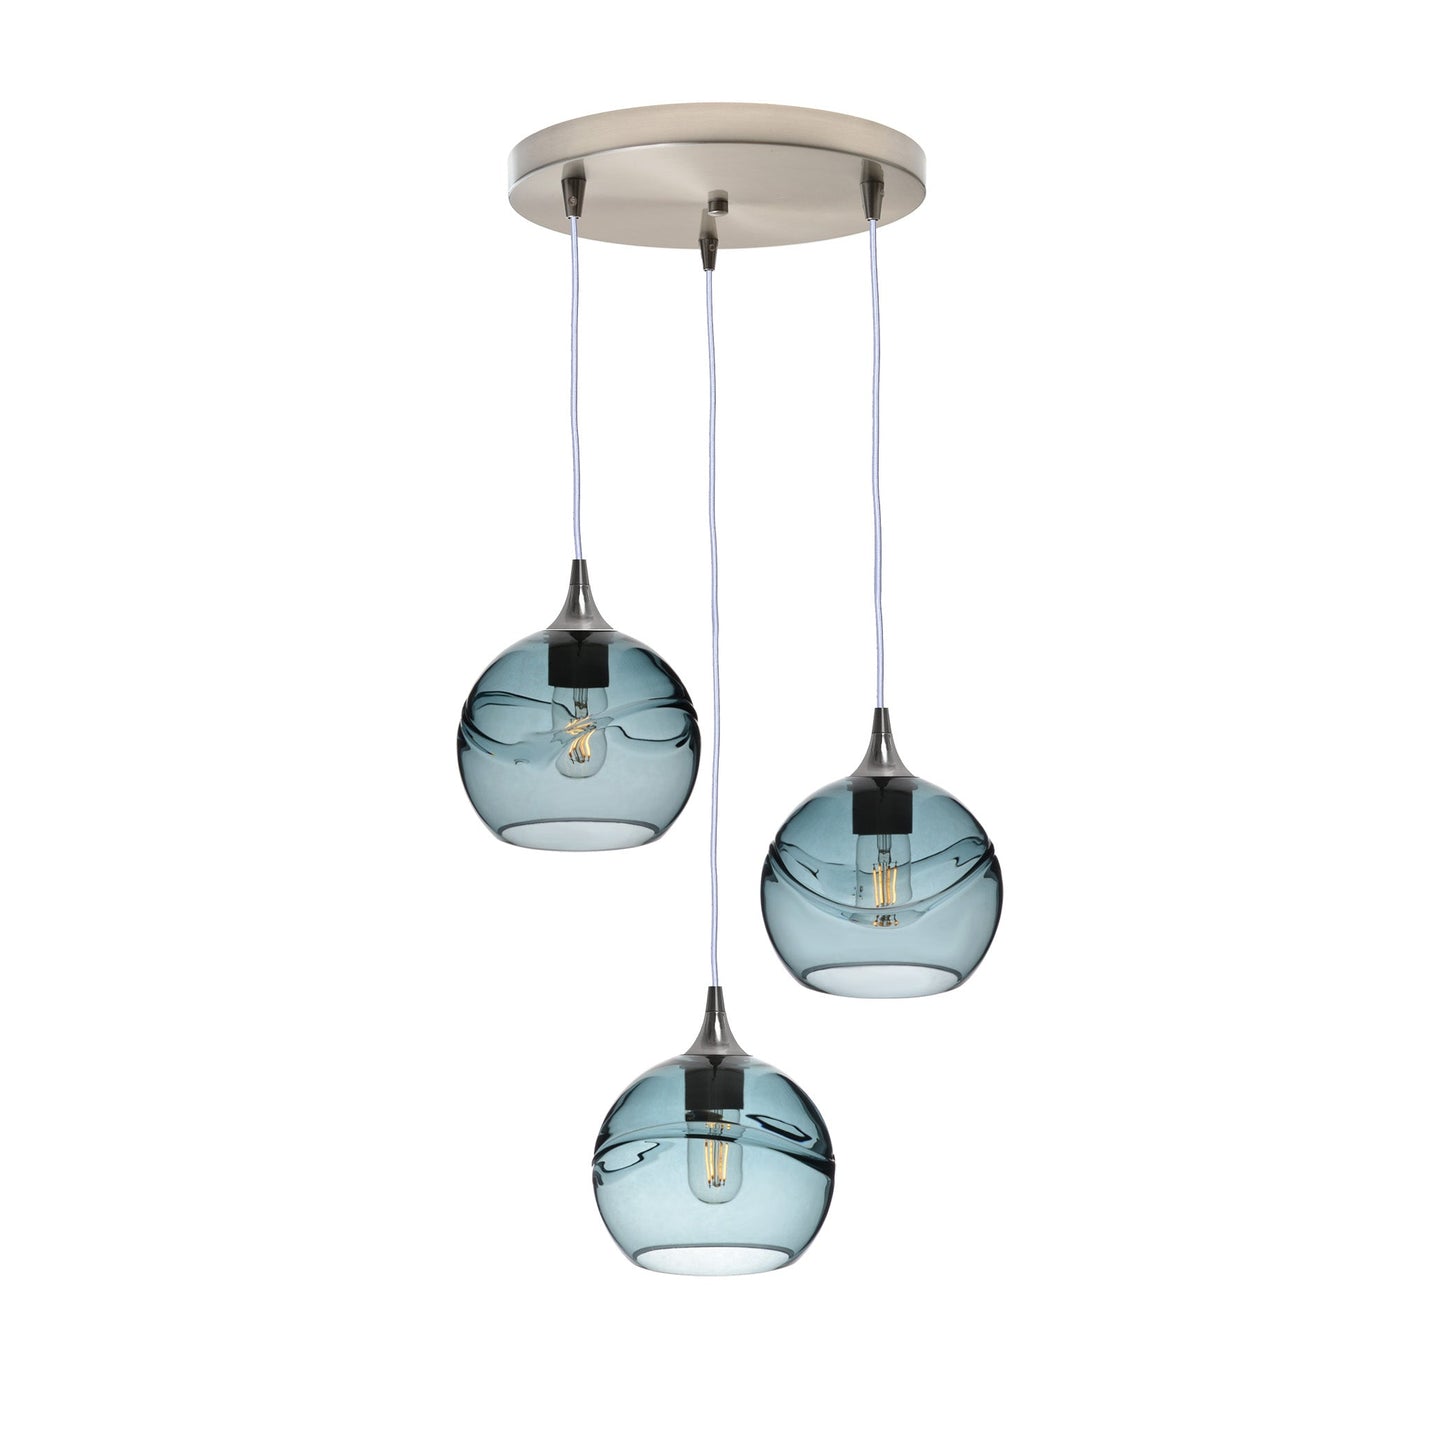 767 Swell: 3 Pendant Cascade Chandelier-Glass-Bicycle Glass Co - Hotshop-Steel Blue-Antique Bronze-Bicycle Glass Co